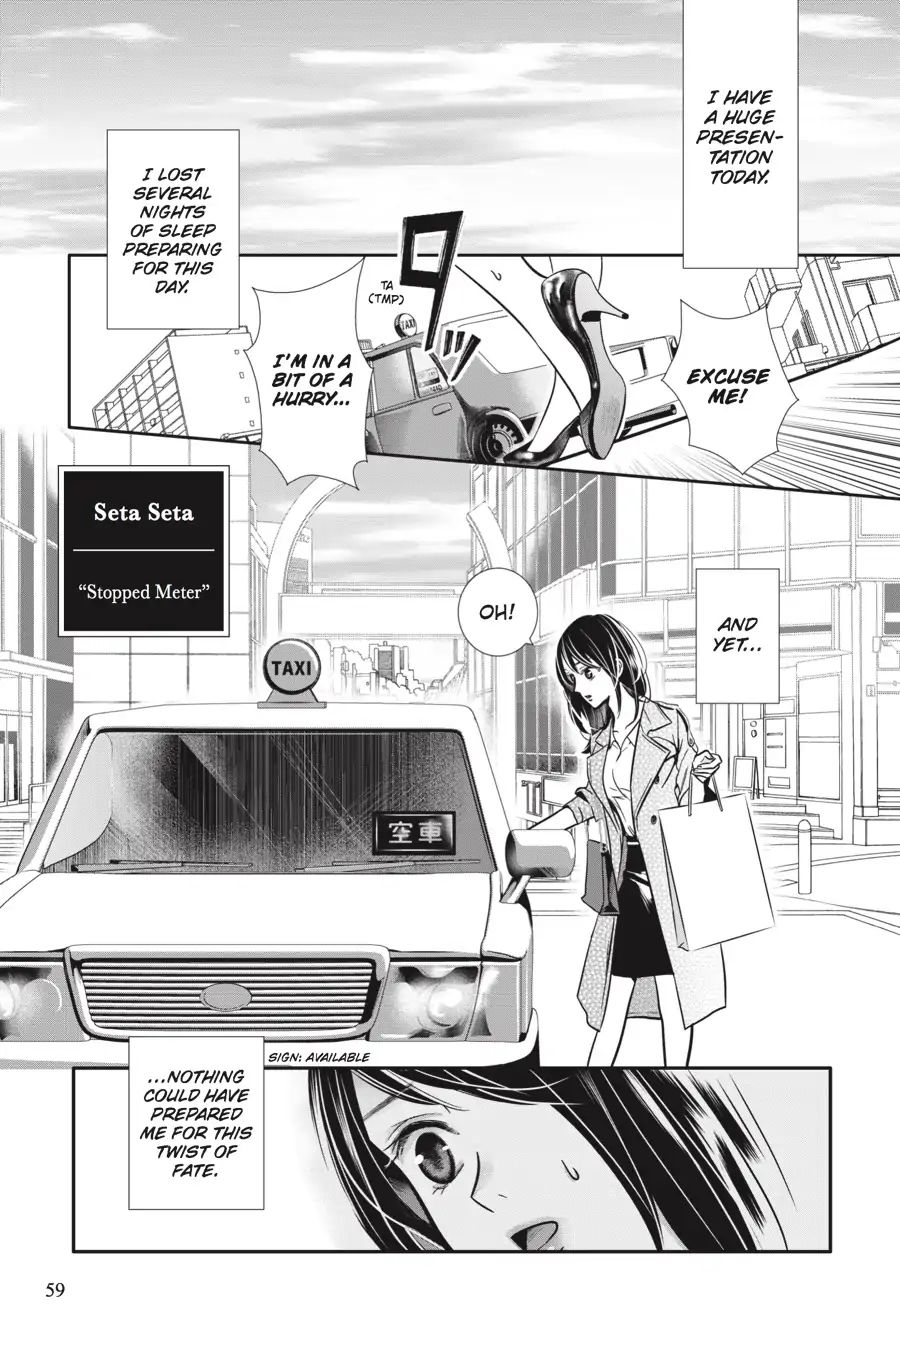 Every Time We Meet Eye To Eye, I Fall In Love With Her Vol.1 Chapter: Seta Seta - Stopped Meter - Picture 1